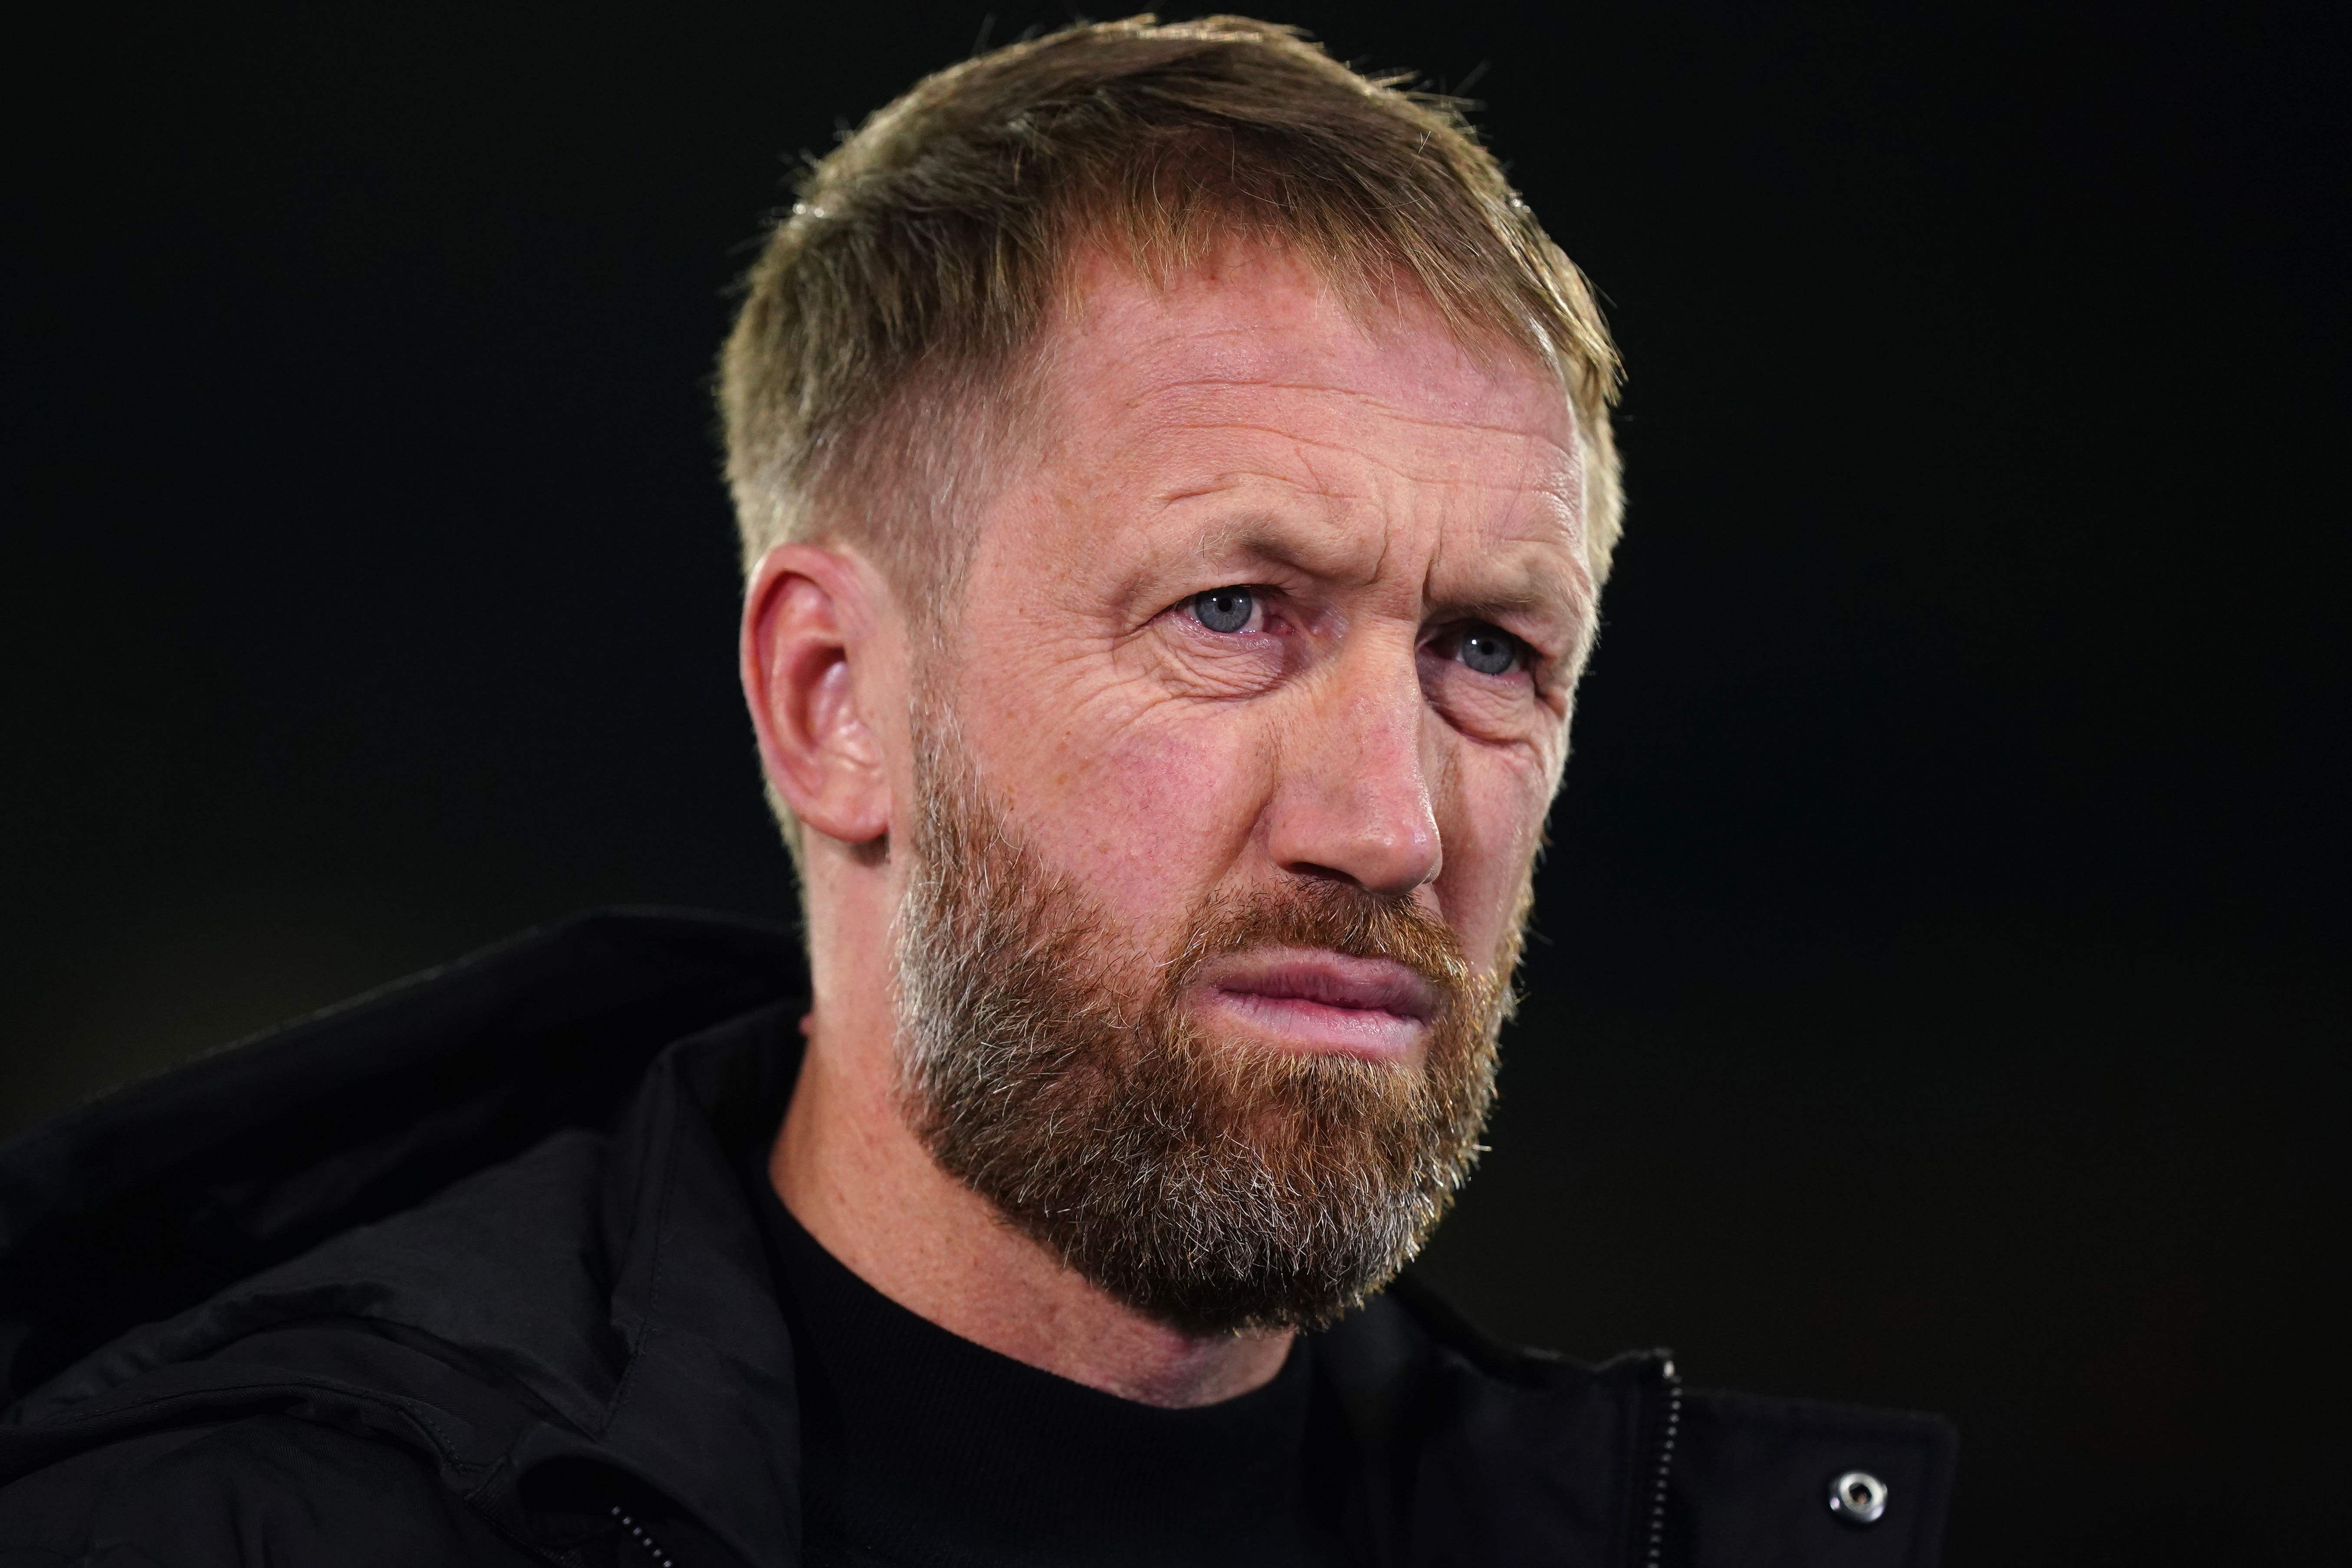 Graham Potter thinks Chelsea have gone through too much change to expect instant results (Mike Egerton/PA)